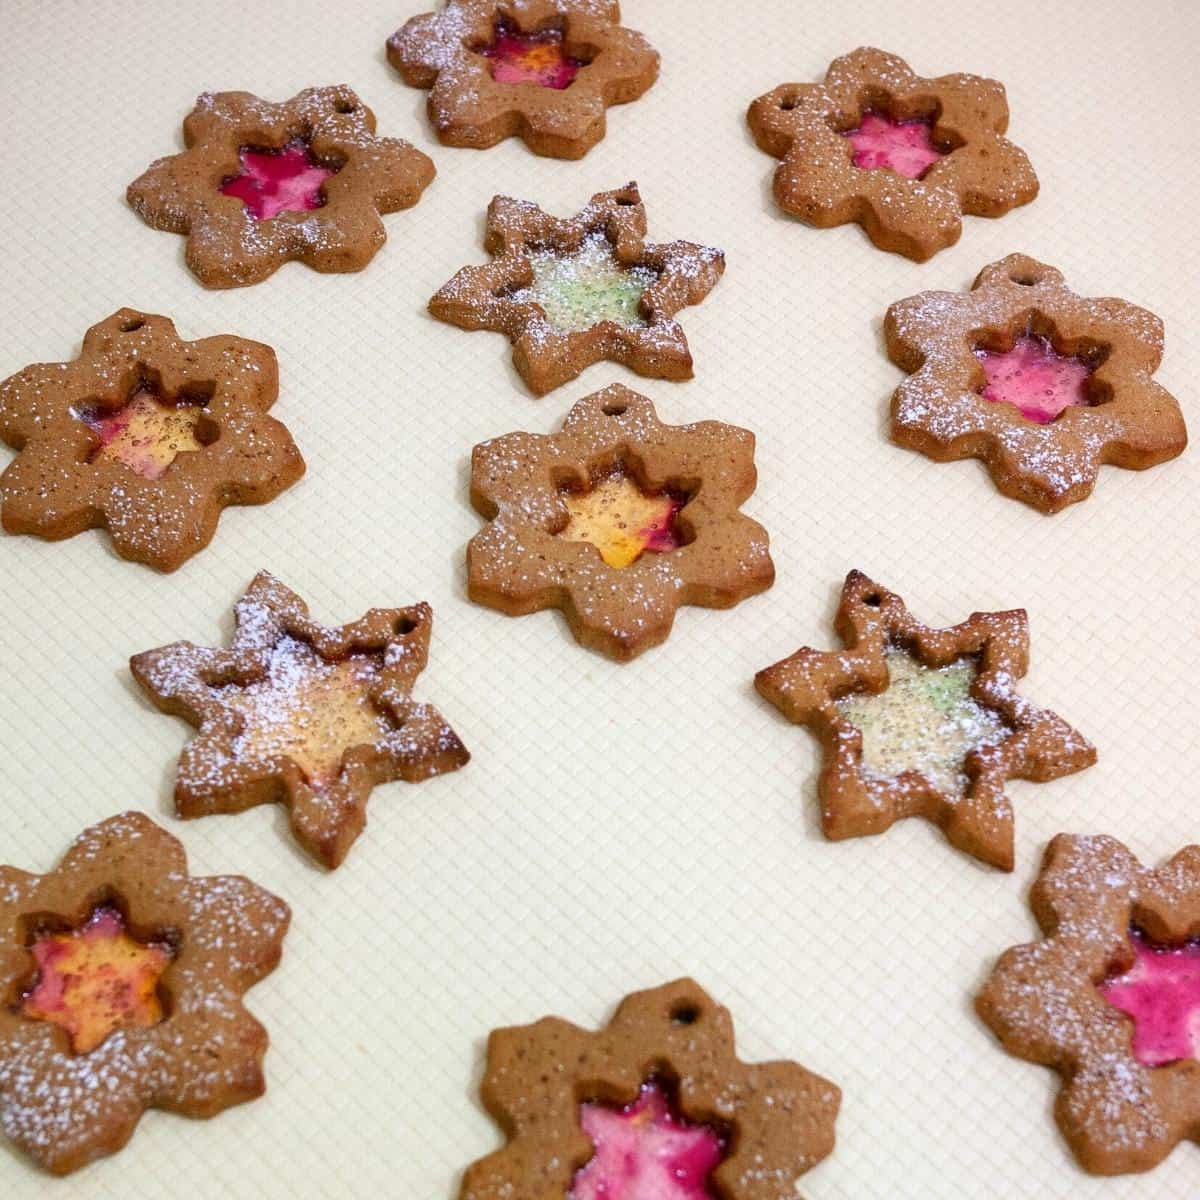 Gingerbread cookies with stained glass cookies.